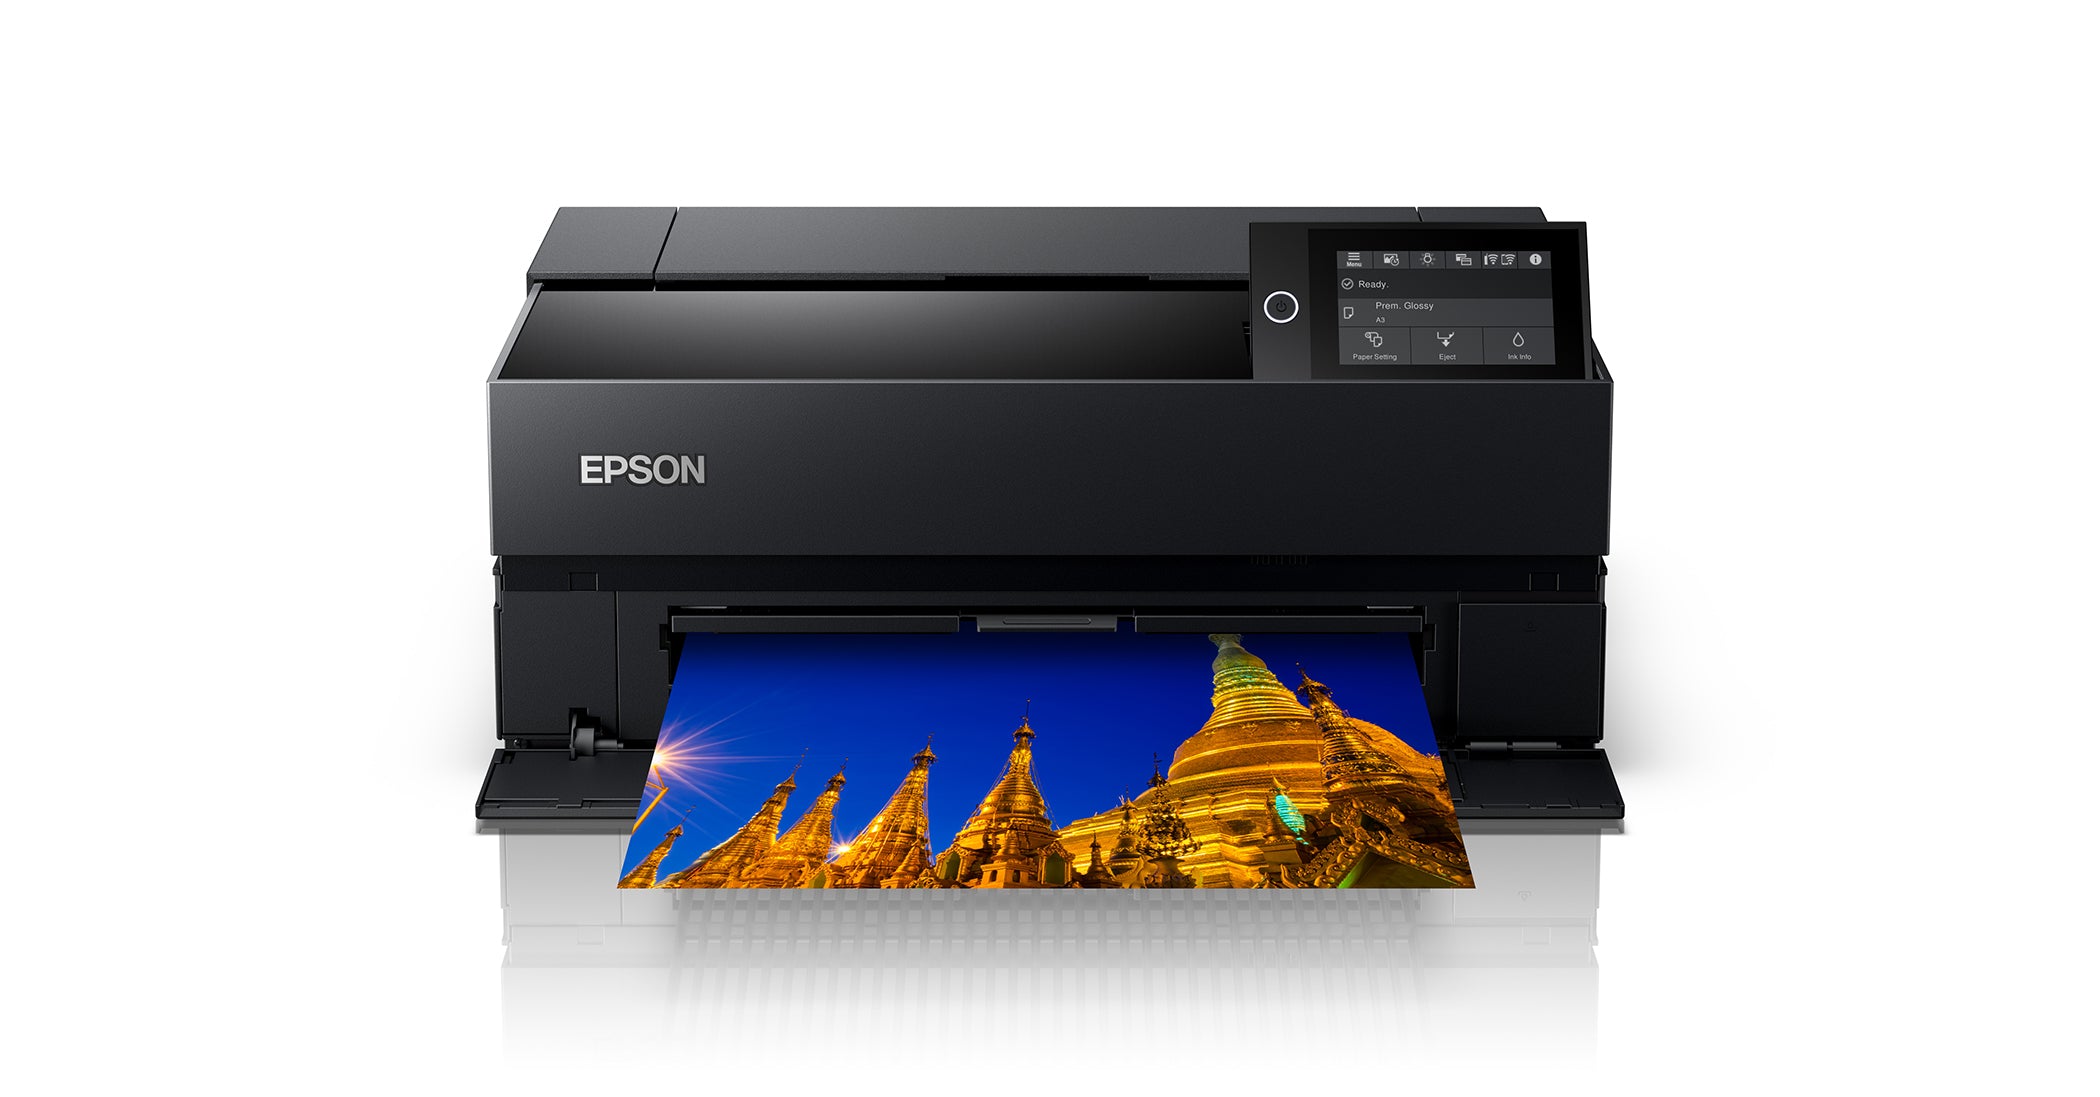 The Epson SureColor P700 is an Artist-Quality Printer For Your